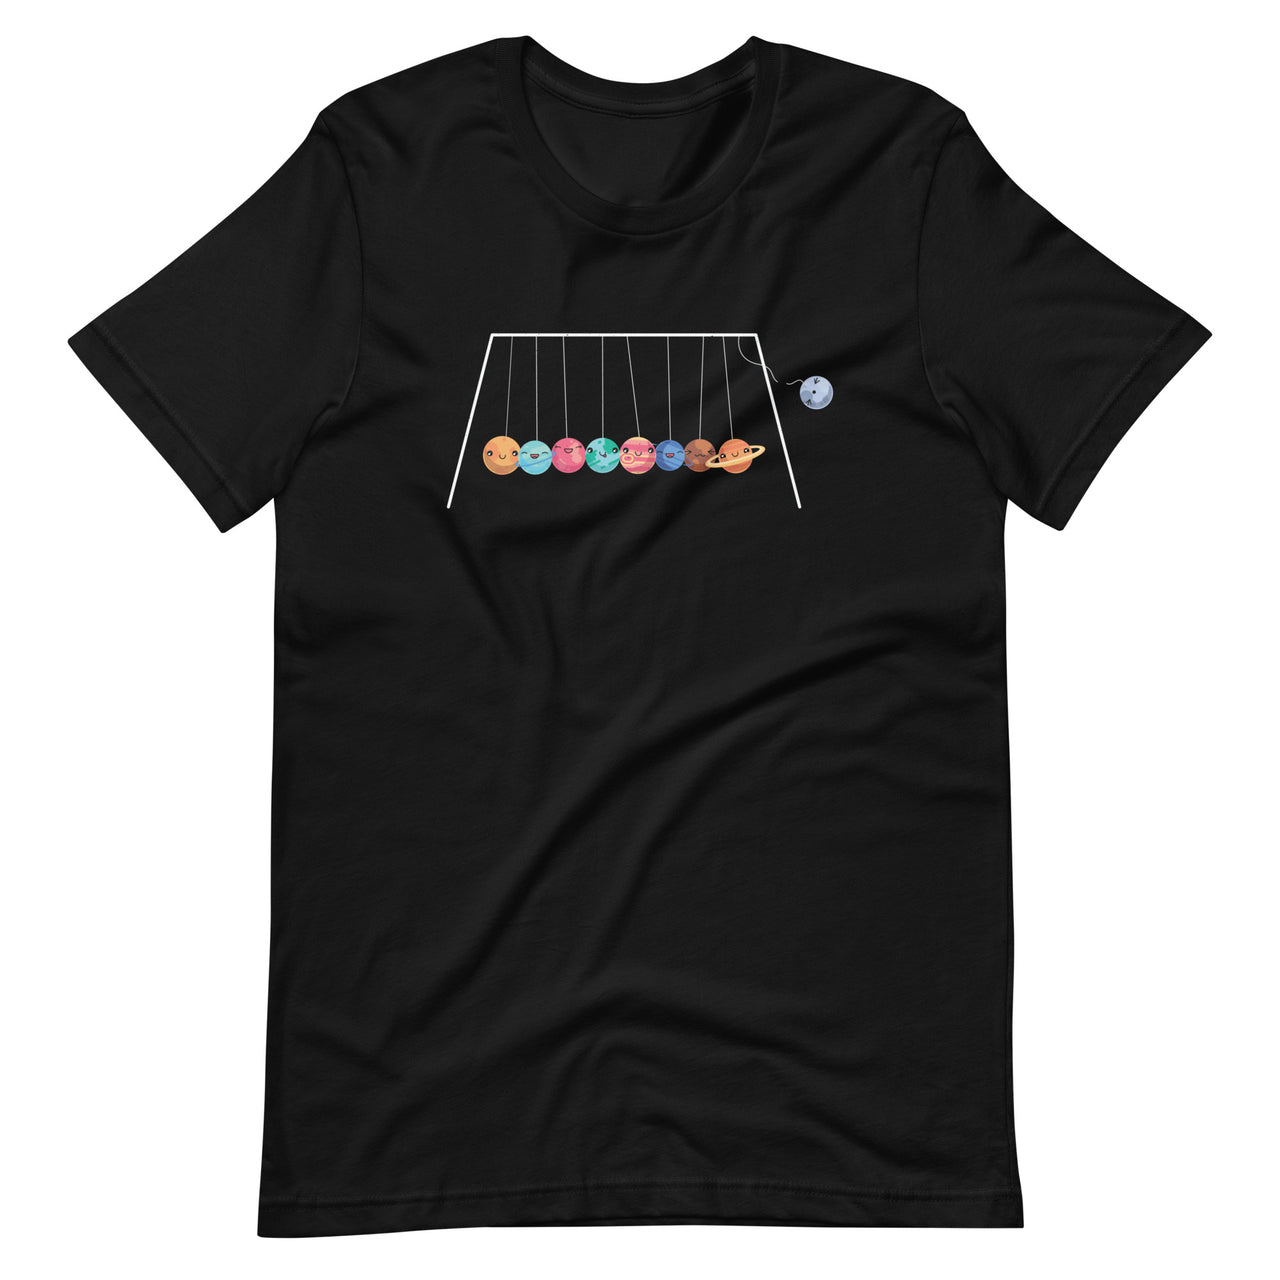 Planets Playing T-Shirt